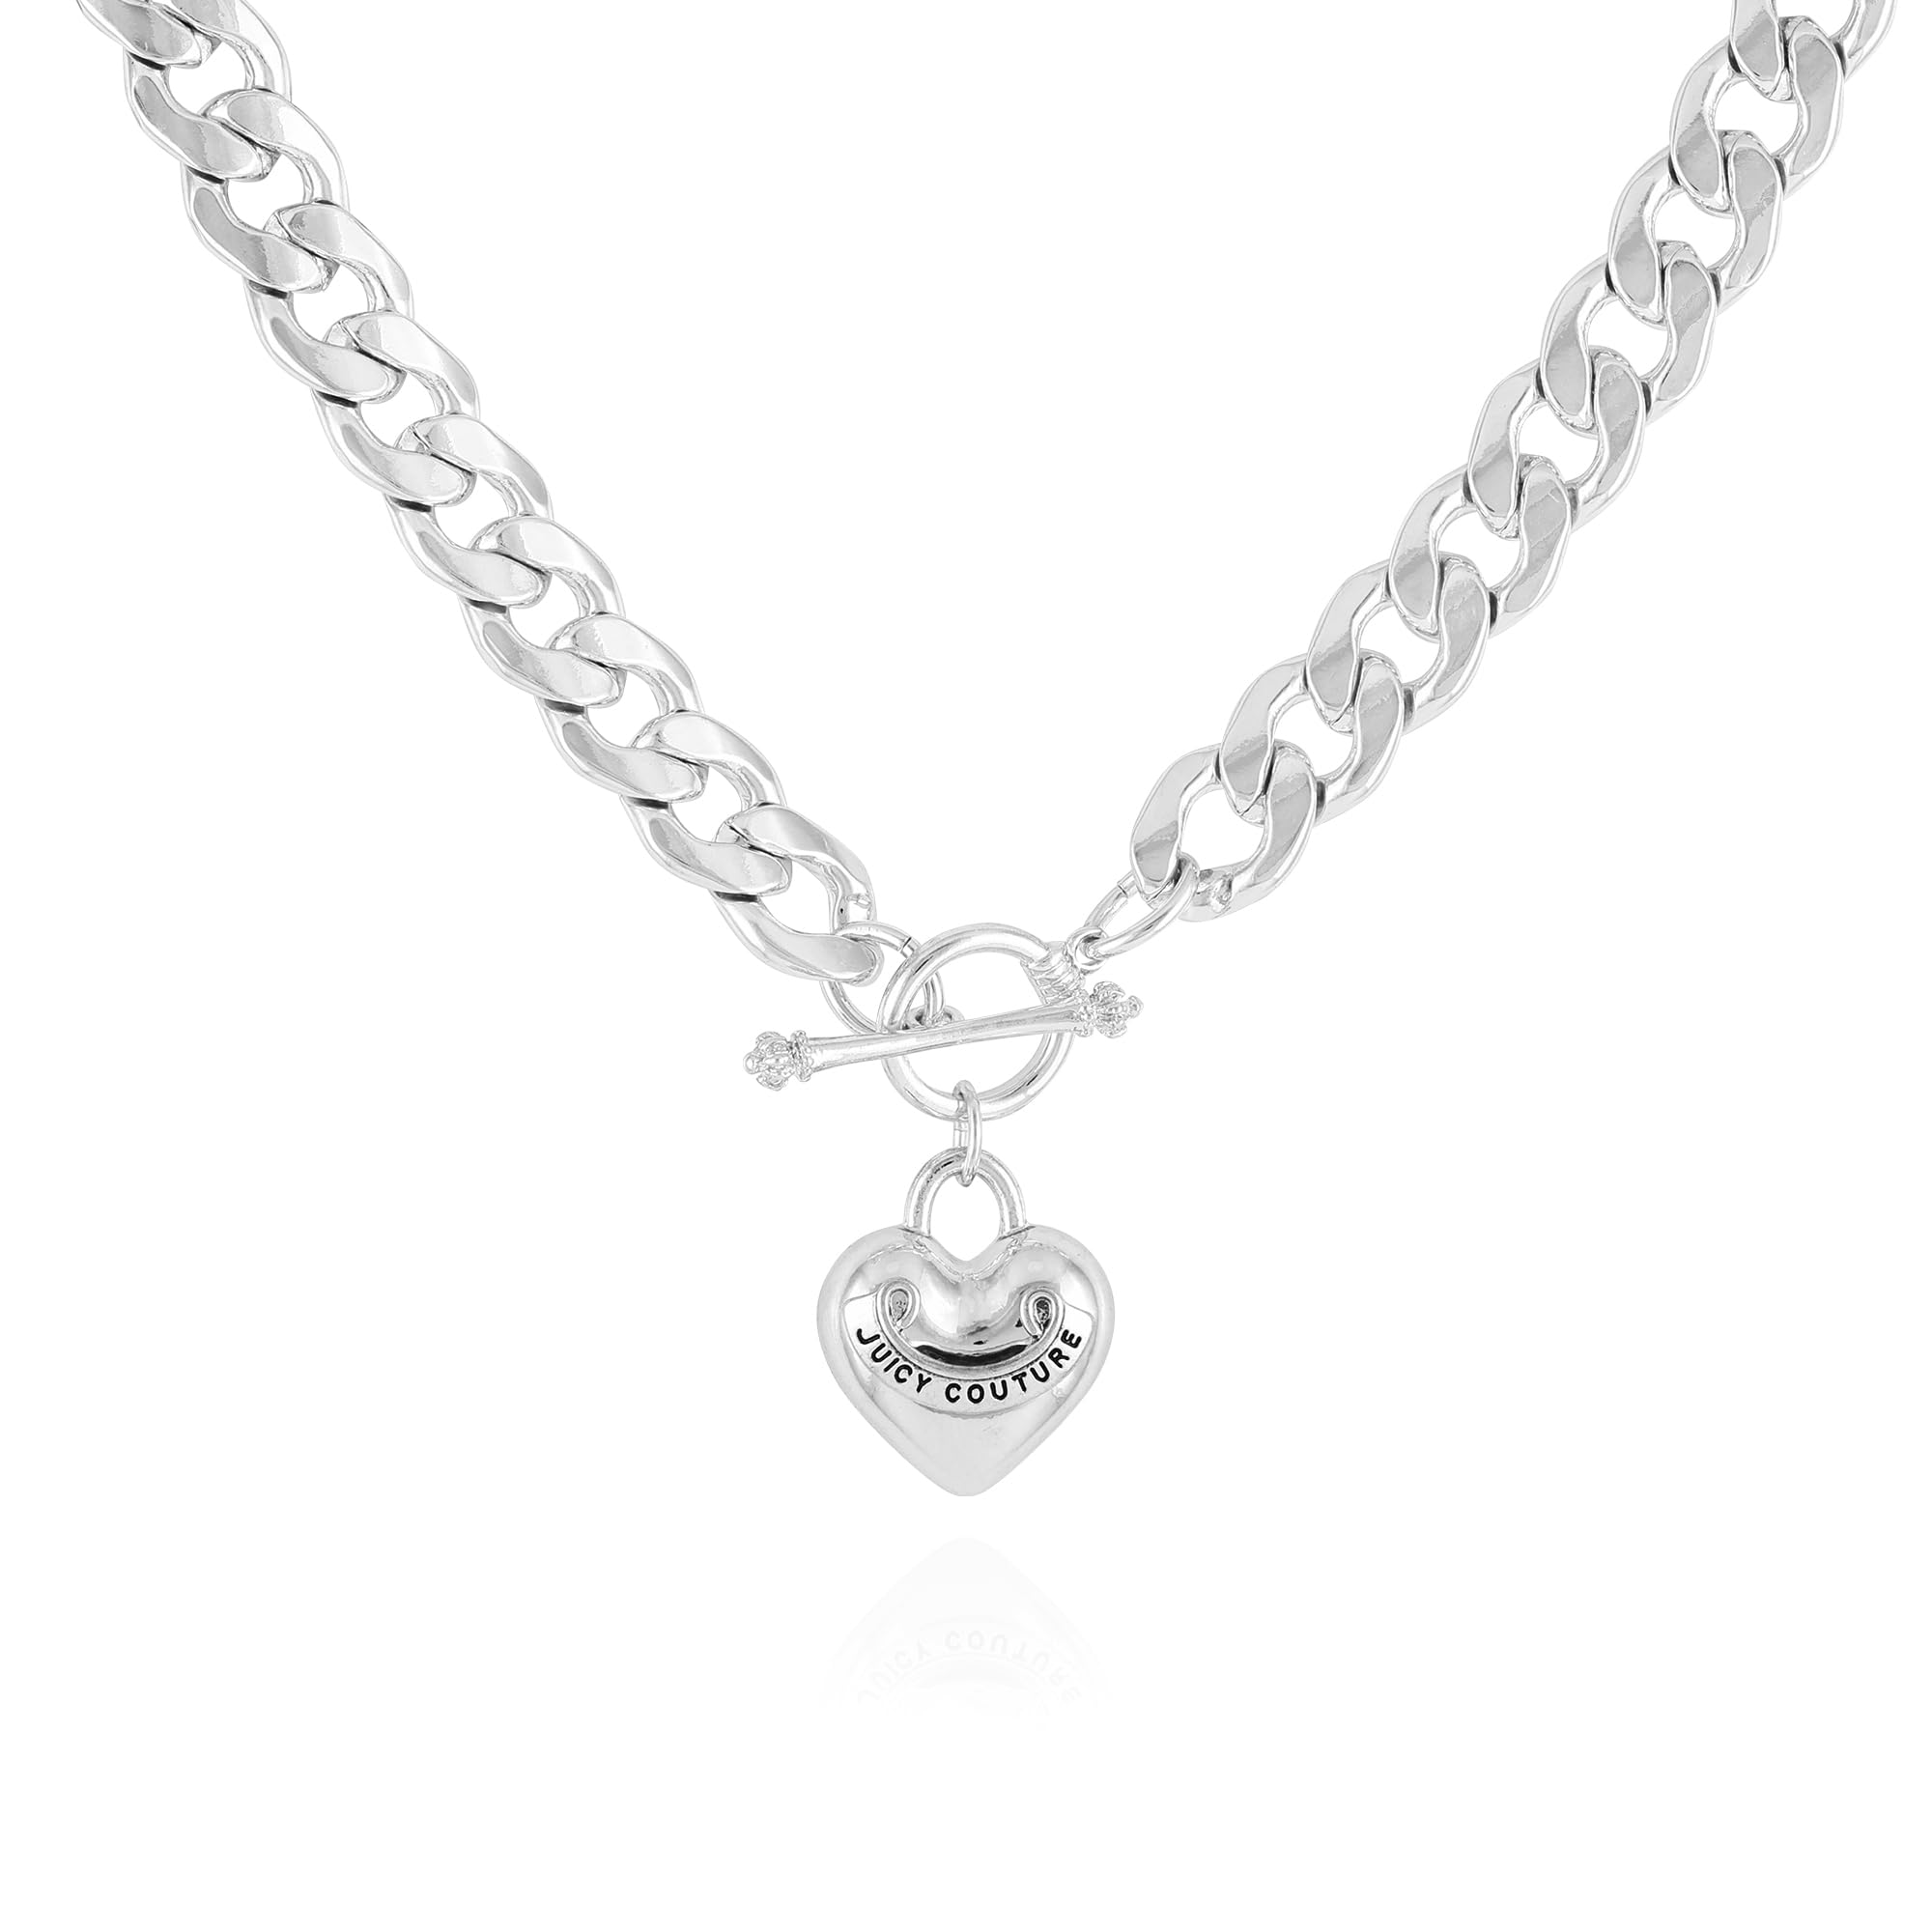 Juicy Couture Silvertone Heart Charm Necklace for Woman